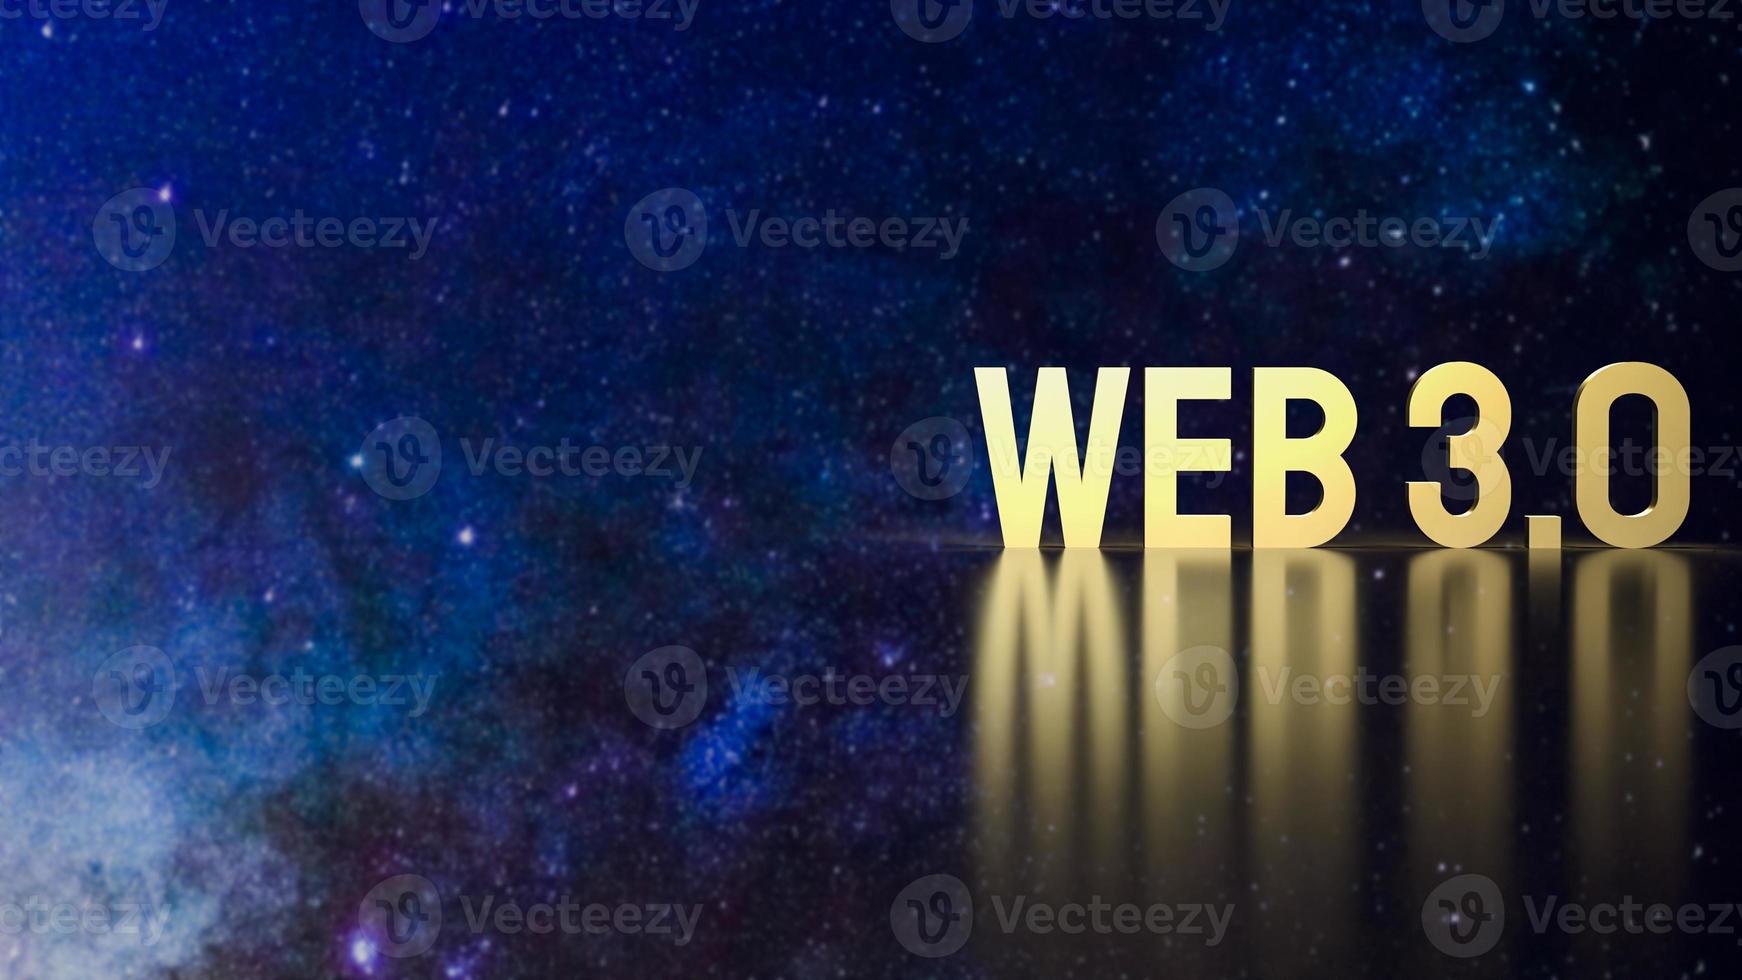 The gold text Web 3.0  on space background  for technology concept 3d rendering photo